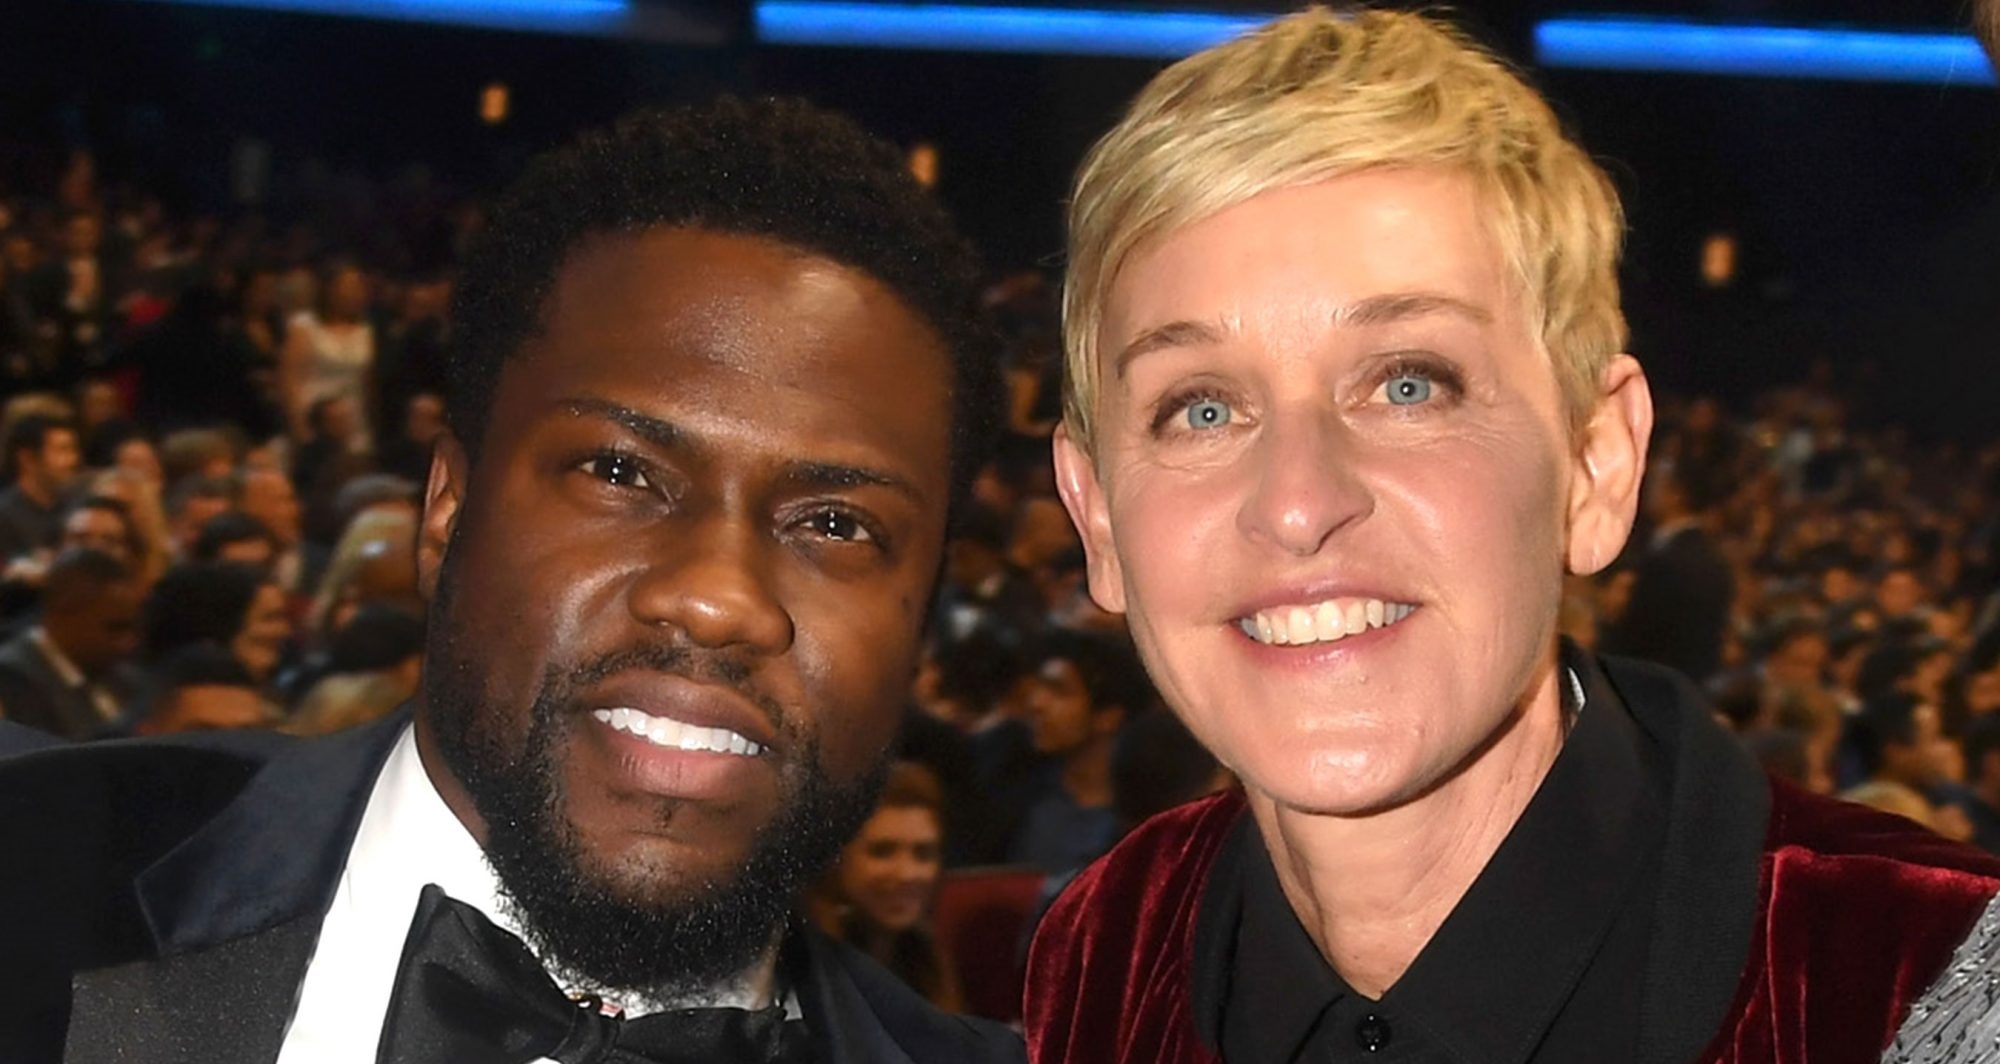 Kevin Hart Extends Support To Ellen DeGeneres: “We’re Falling In love With People’s Downfall”